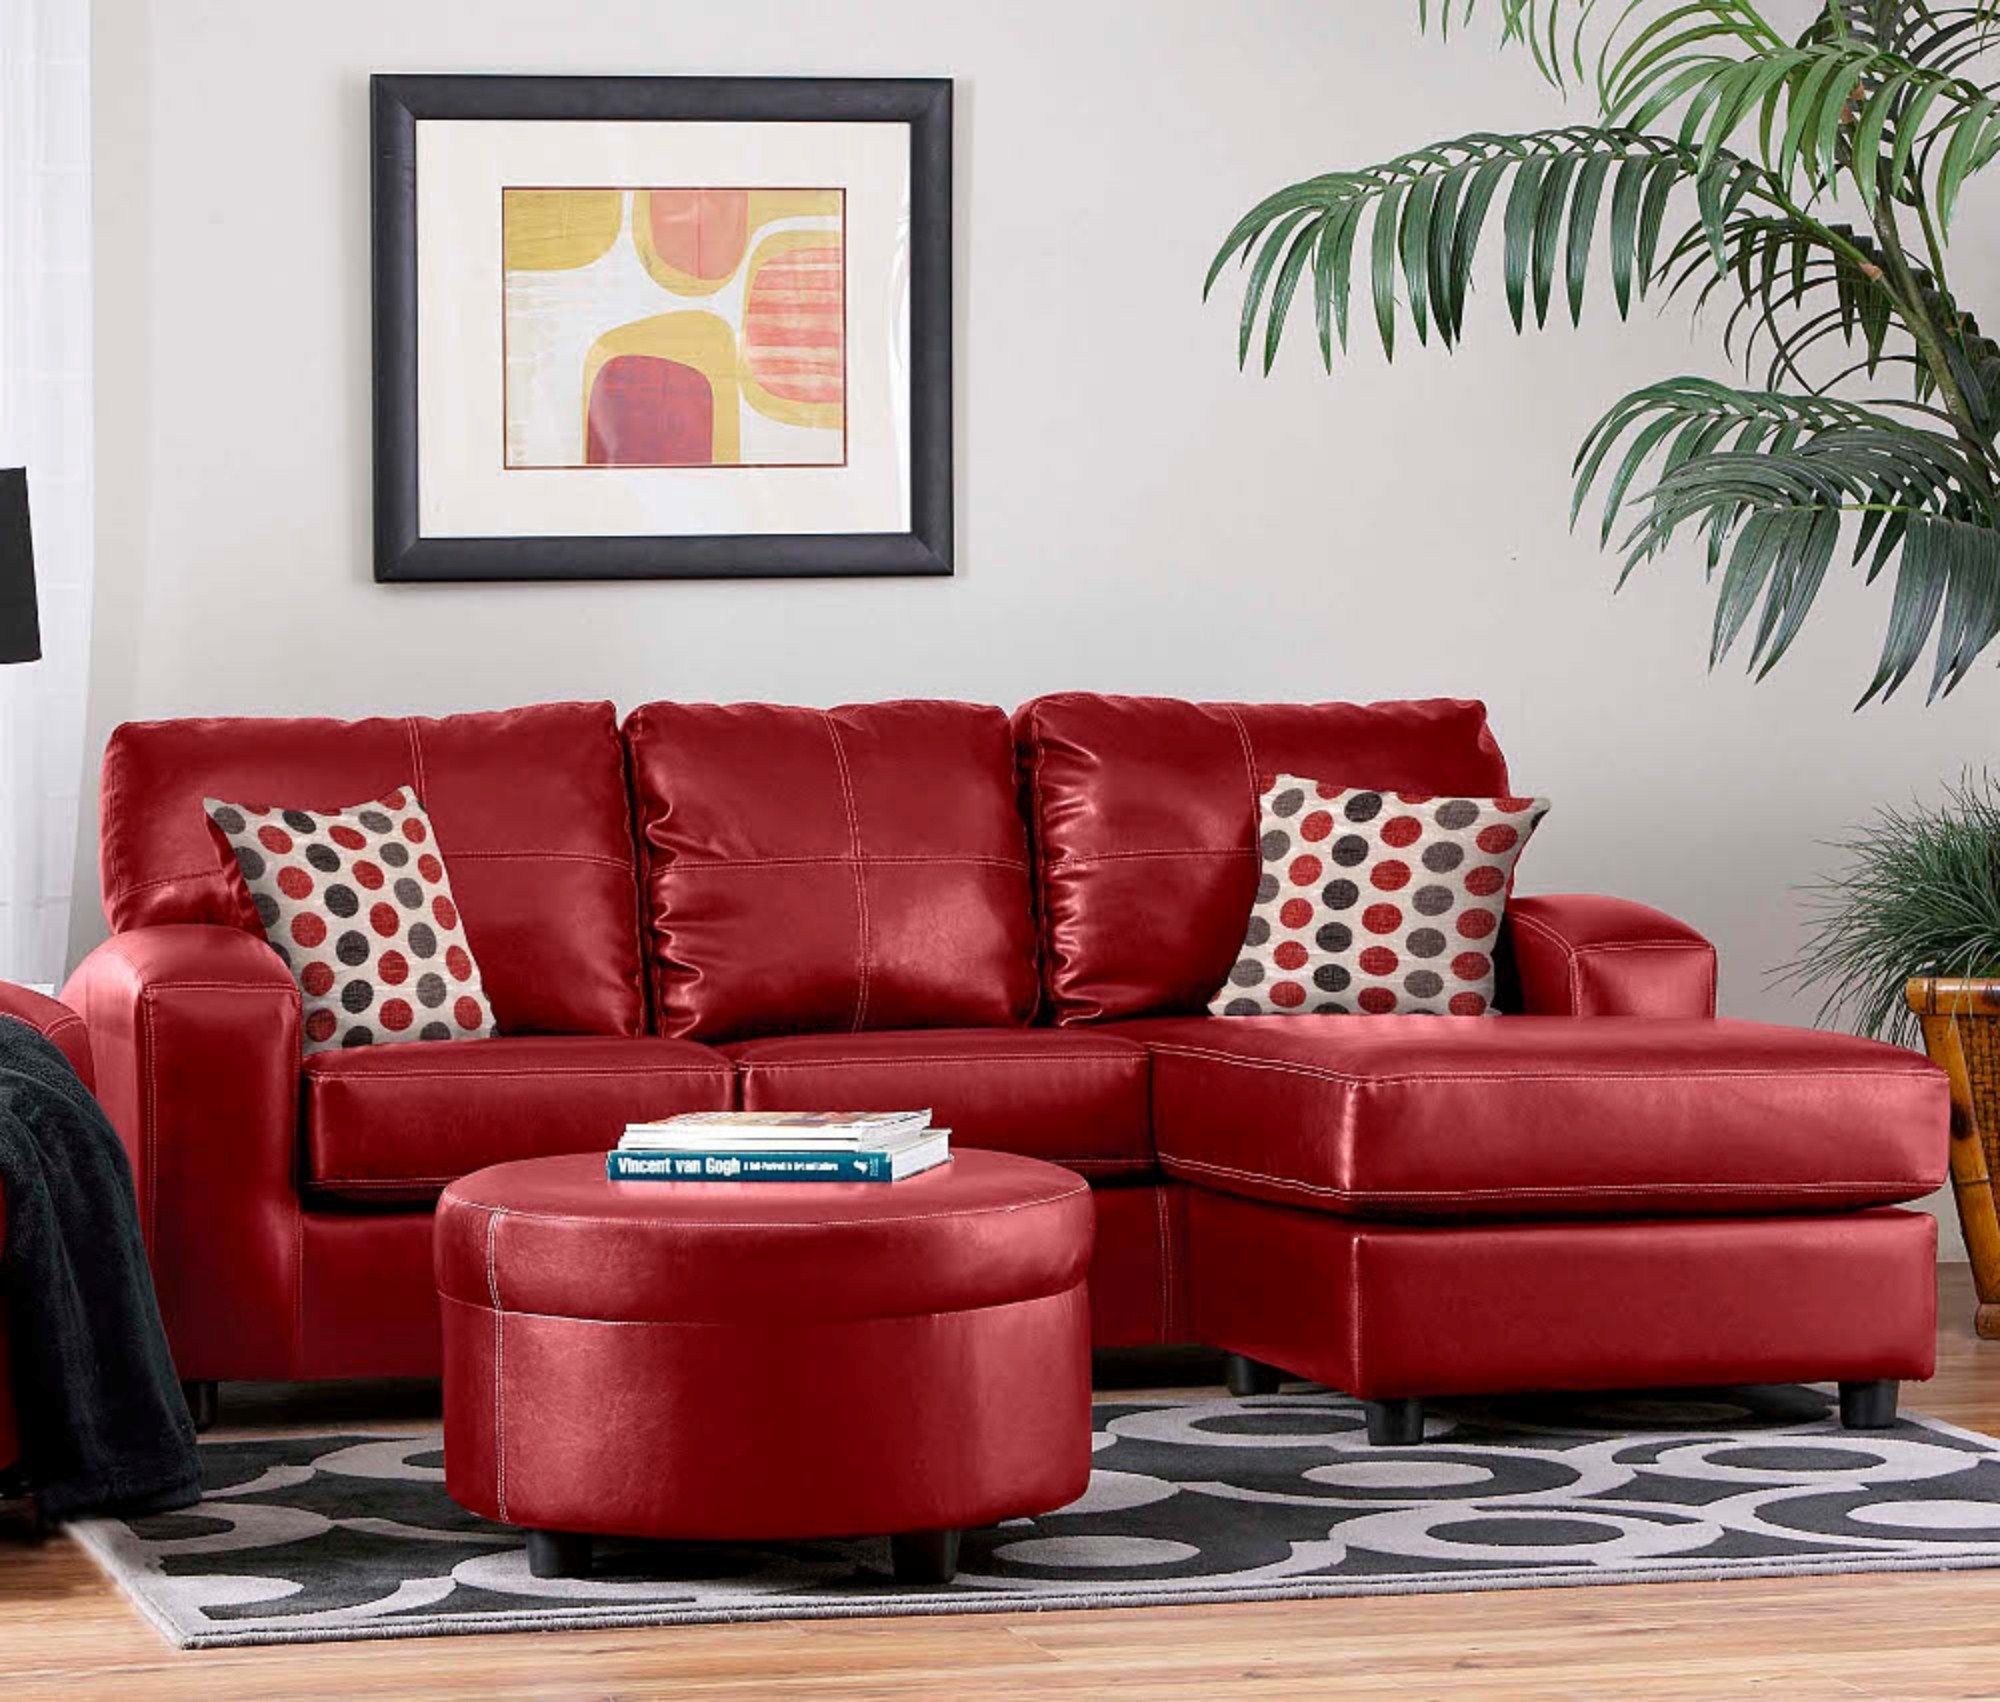 Small Red Leather Sectional Sofa | Ezhandui In Small Red Leather Sectional Sofas (Photo 1 of 10)